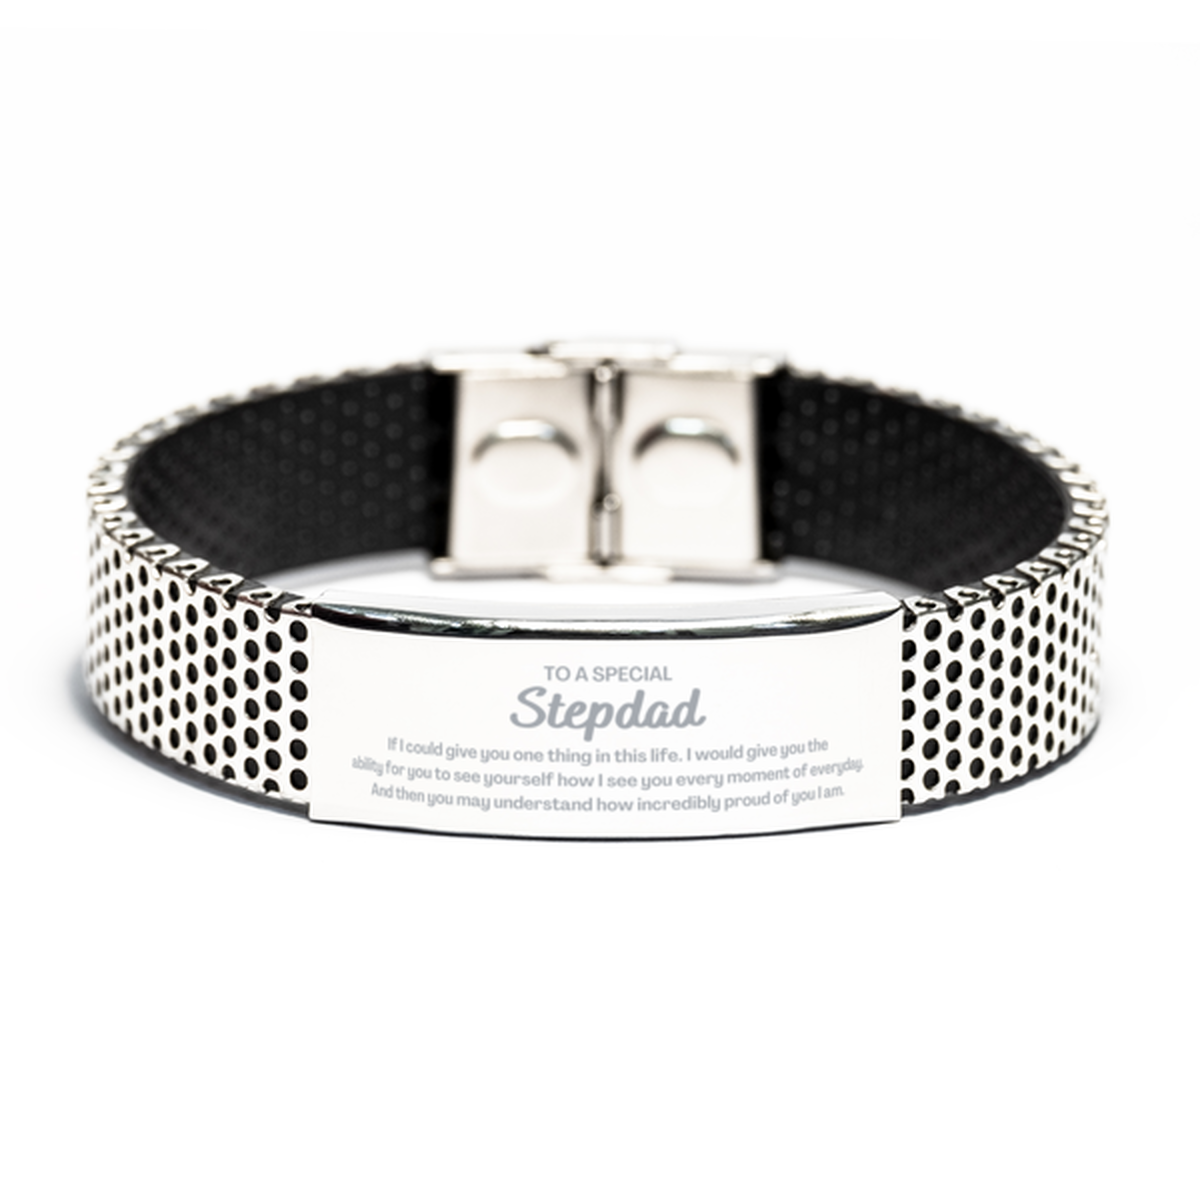 To My Stepdad Stainless Steel Bracelet, Gifts For Stepdad Engraved, Inspirational Gifts for Christmas Birthday, Epic Gifts for Stepdad To A Special Stepdad how incredibly proud of you I am